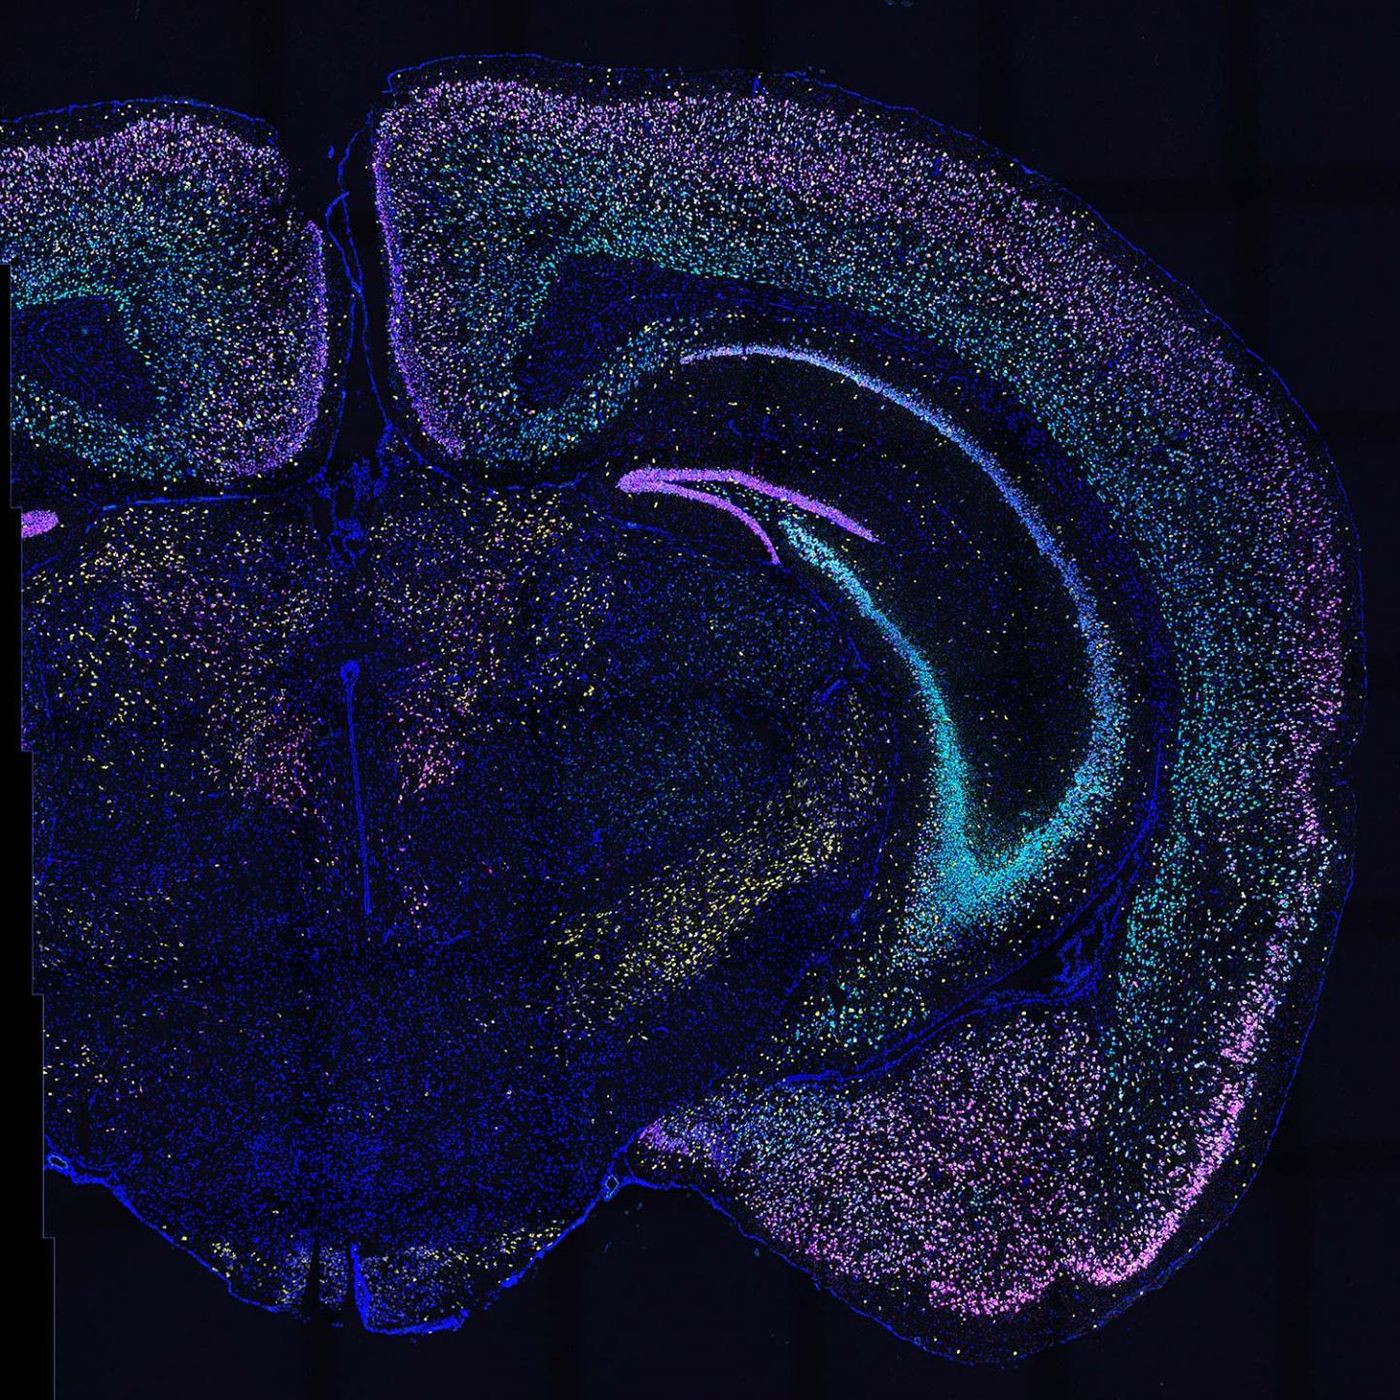 BARseq2 detects dozens of genes in thousands of neurons in this mouse brain slice. Each color lights up a different set of genes. / Credit: Chen and Sun/Zador lab, CSHL/2021